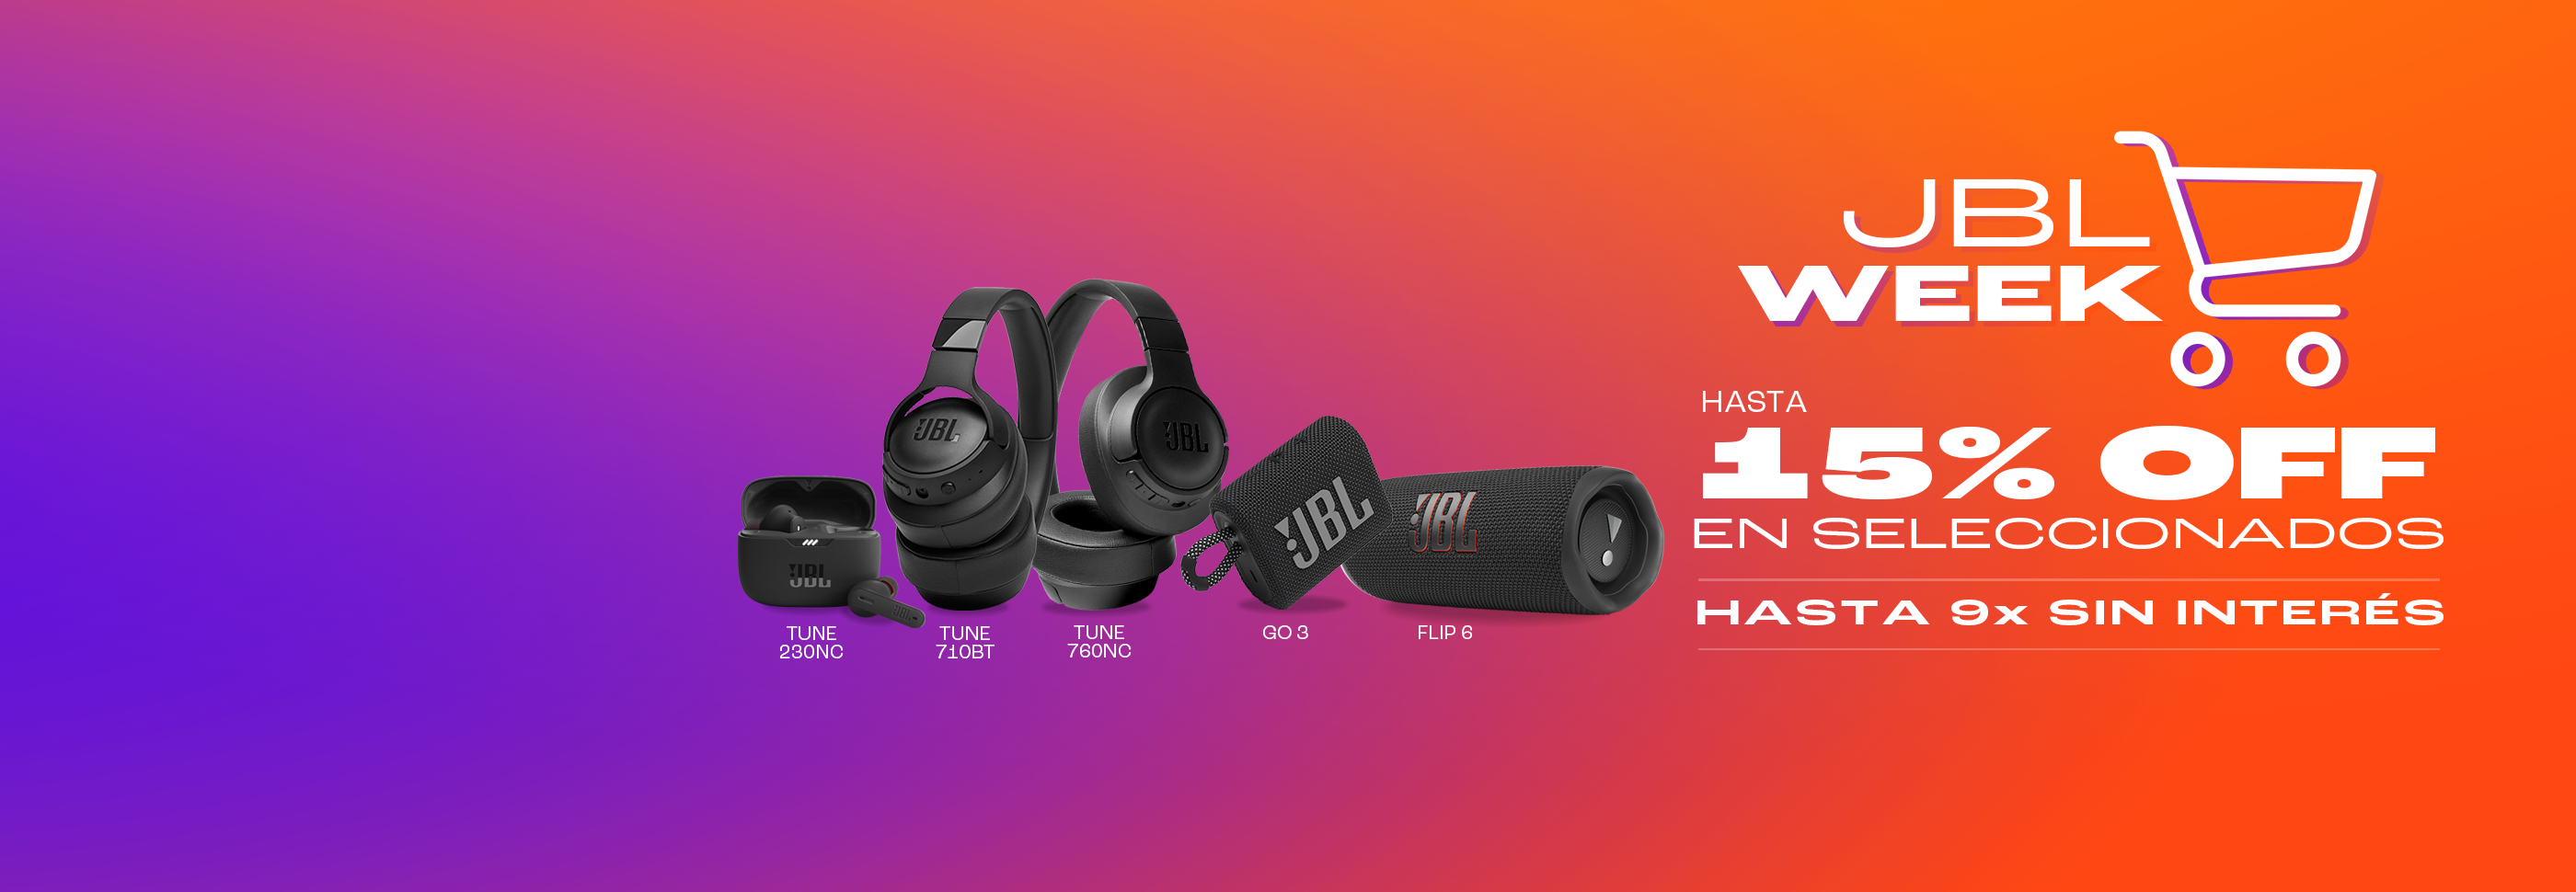 All-Star Sound, Discover JBL NBA Special Edition Speakers and Headphones. Shop Now.